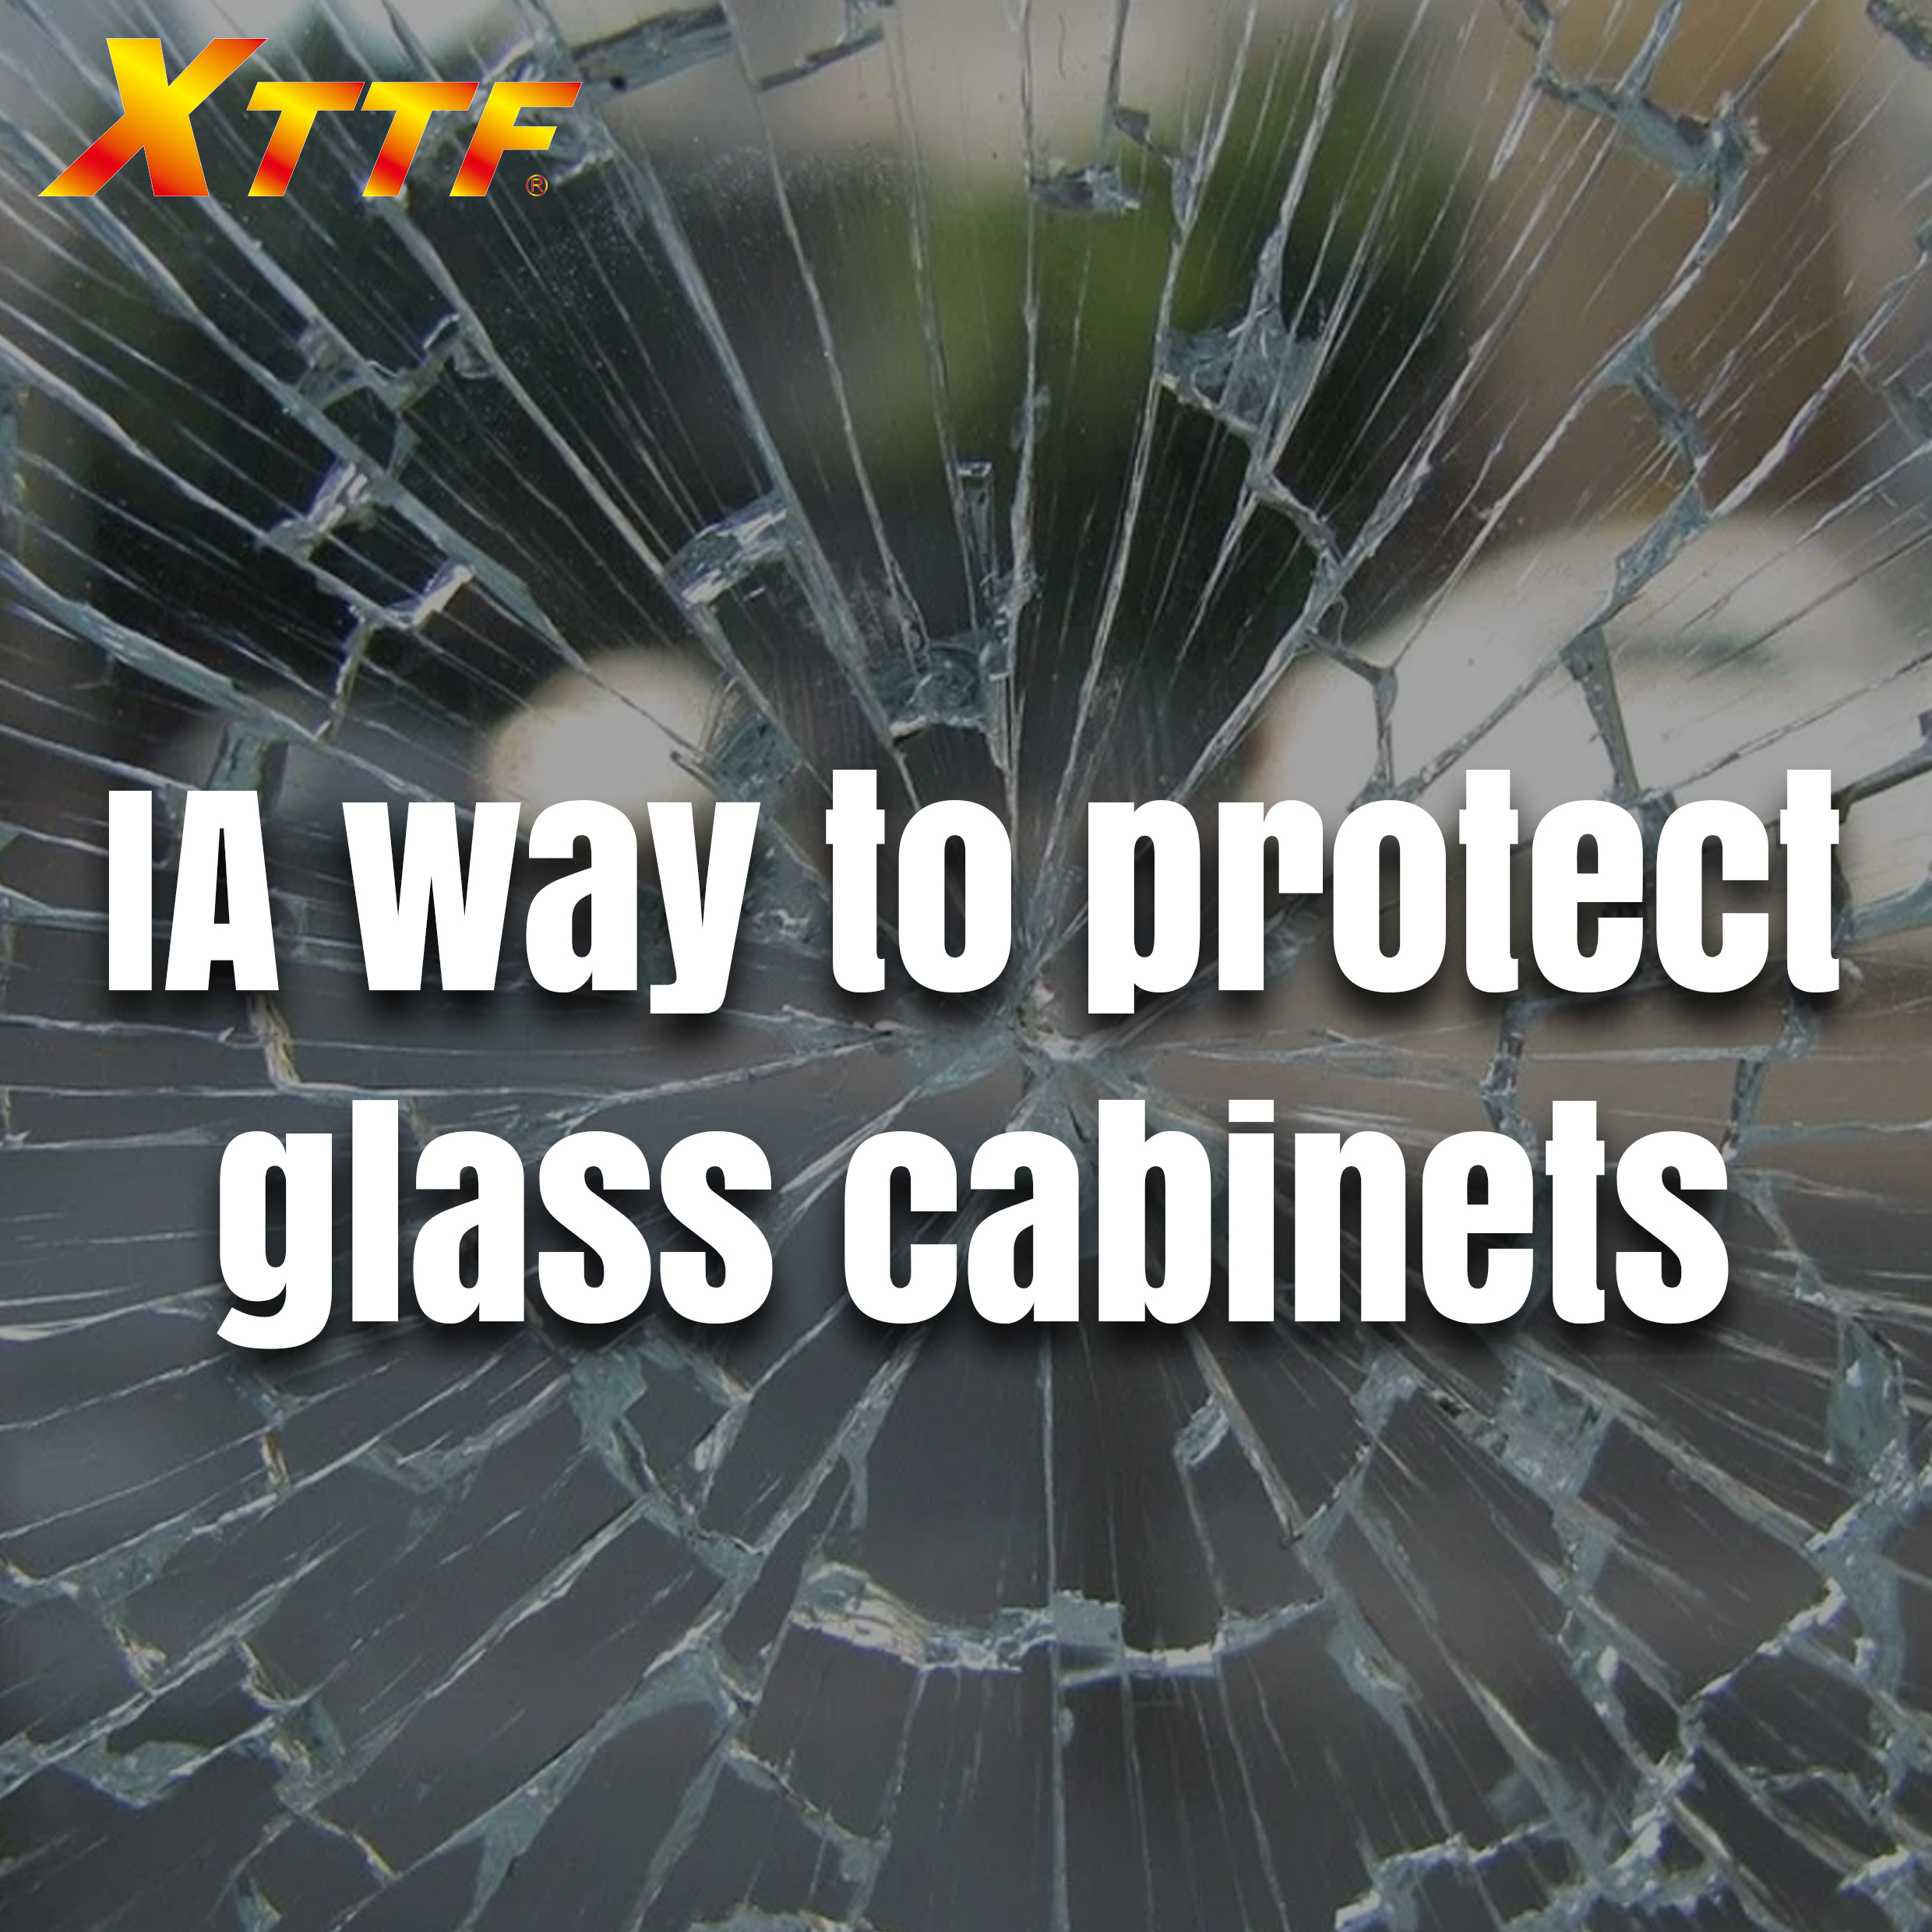 Glass explosion-proof film should be used to deal with “Zero-dollar Shopping”